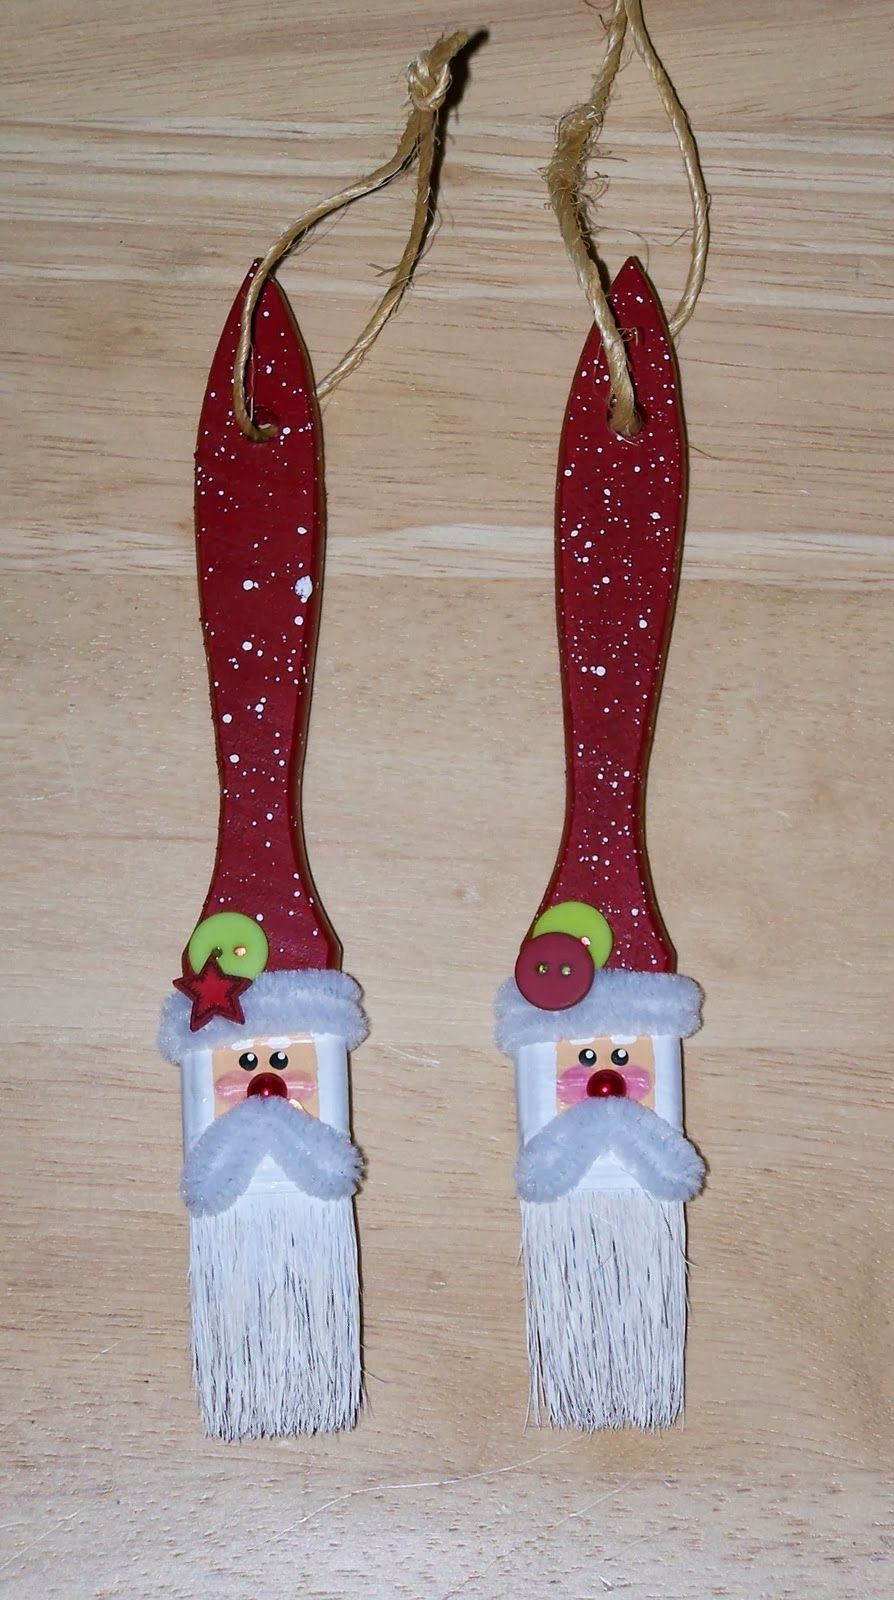 Best ideas about Pinterest Christmas Craft Ideas
. Save or Pin pinterest christmas crafts to sell – Google Search More Now.